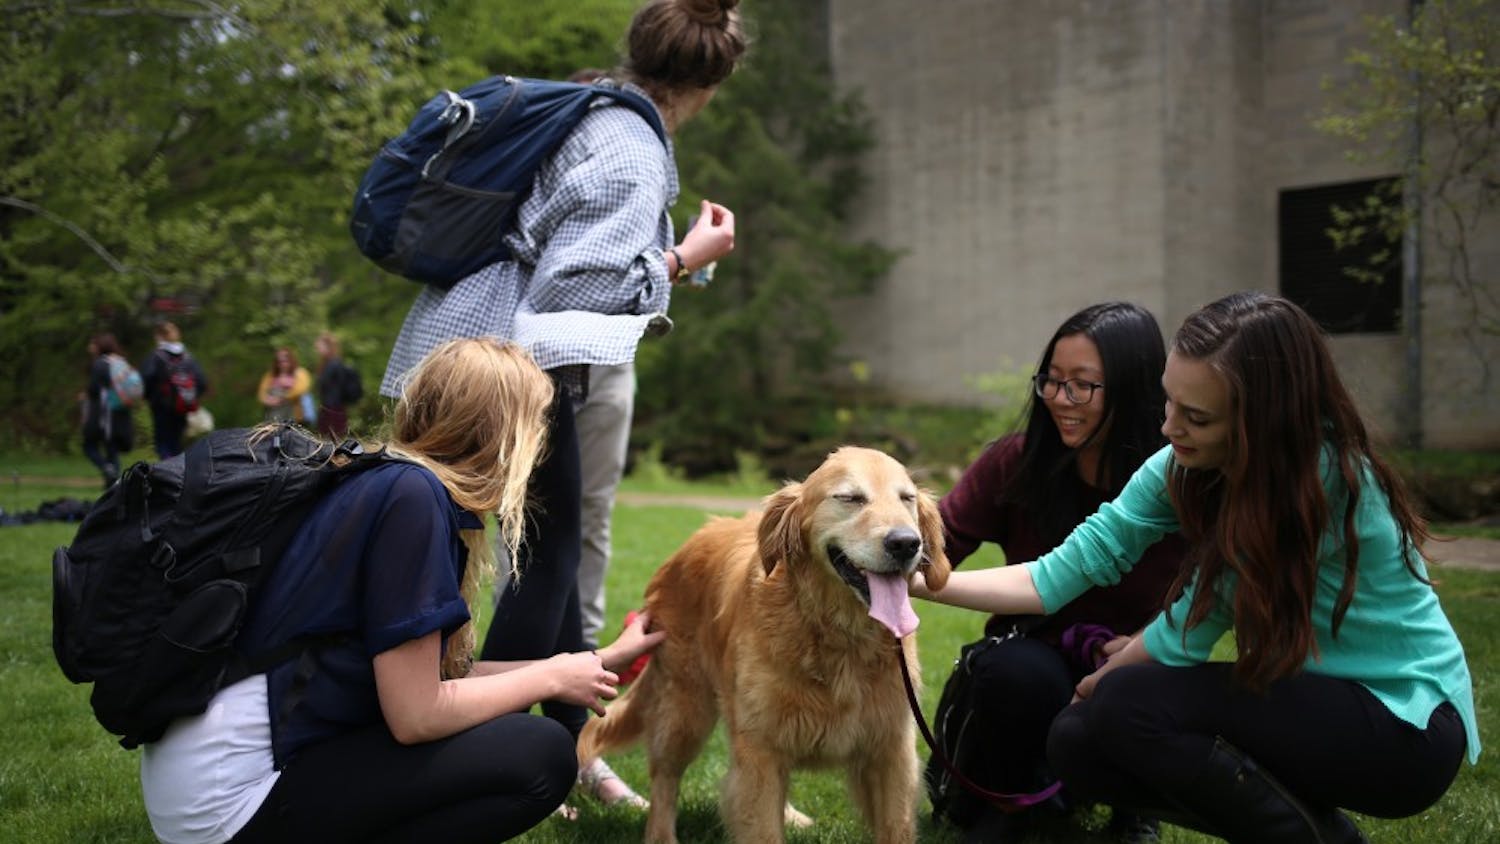 Students play with Max, a rescue dog donated for the event by his owners, at the Rent-A-Puppy event at Dunn Meadow in 2016. Some people find playing with animals can be a good way to reduce stress.